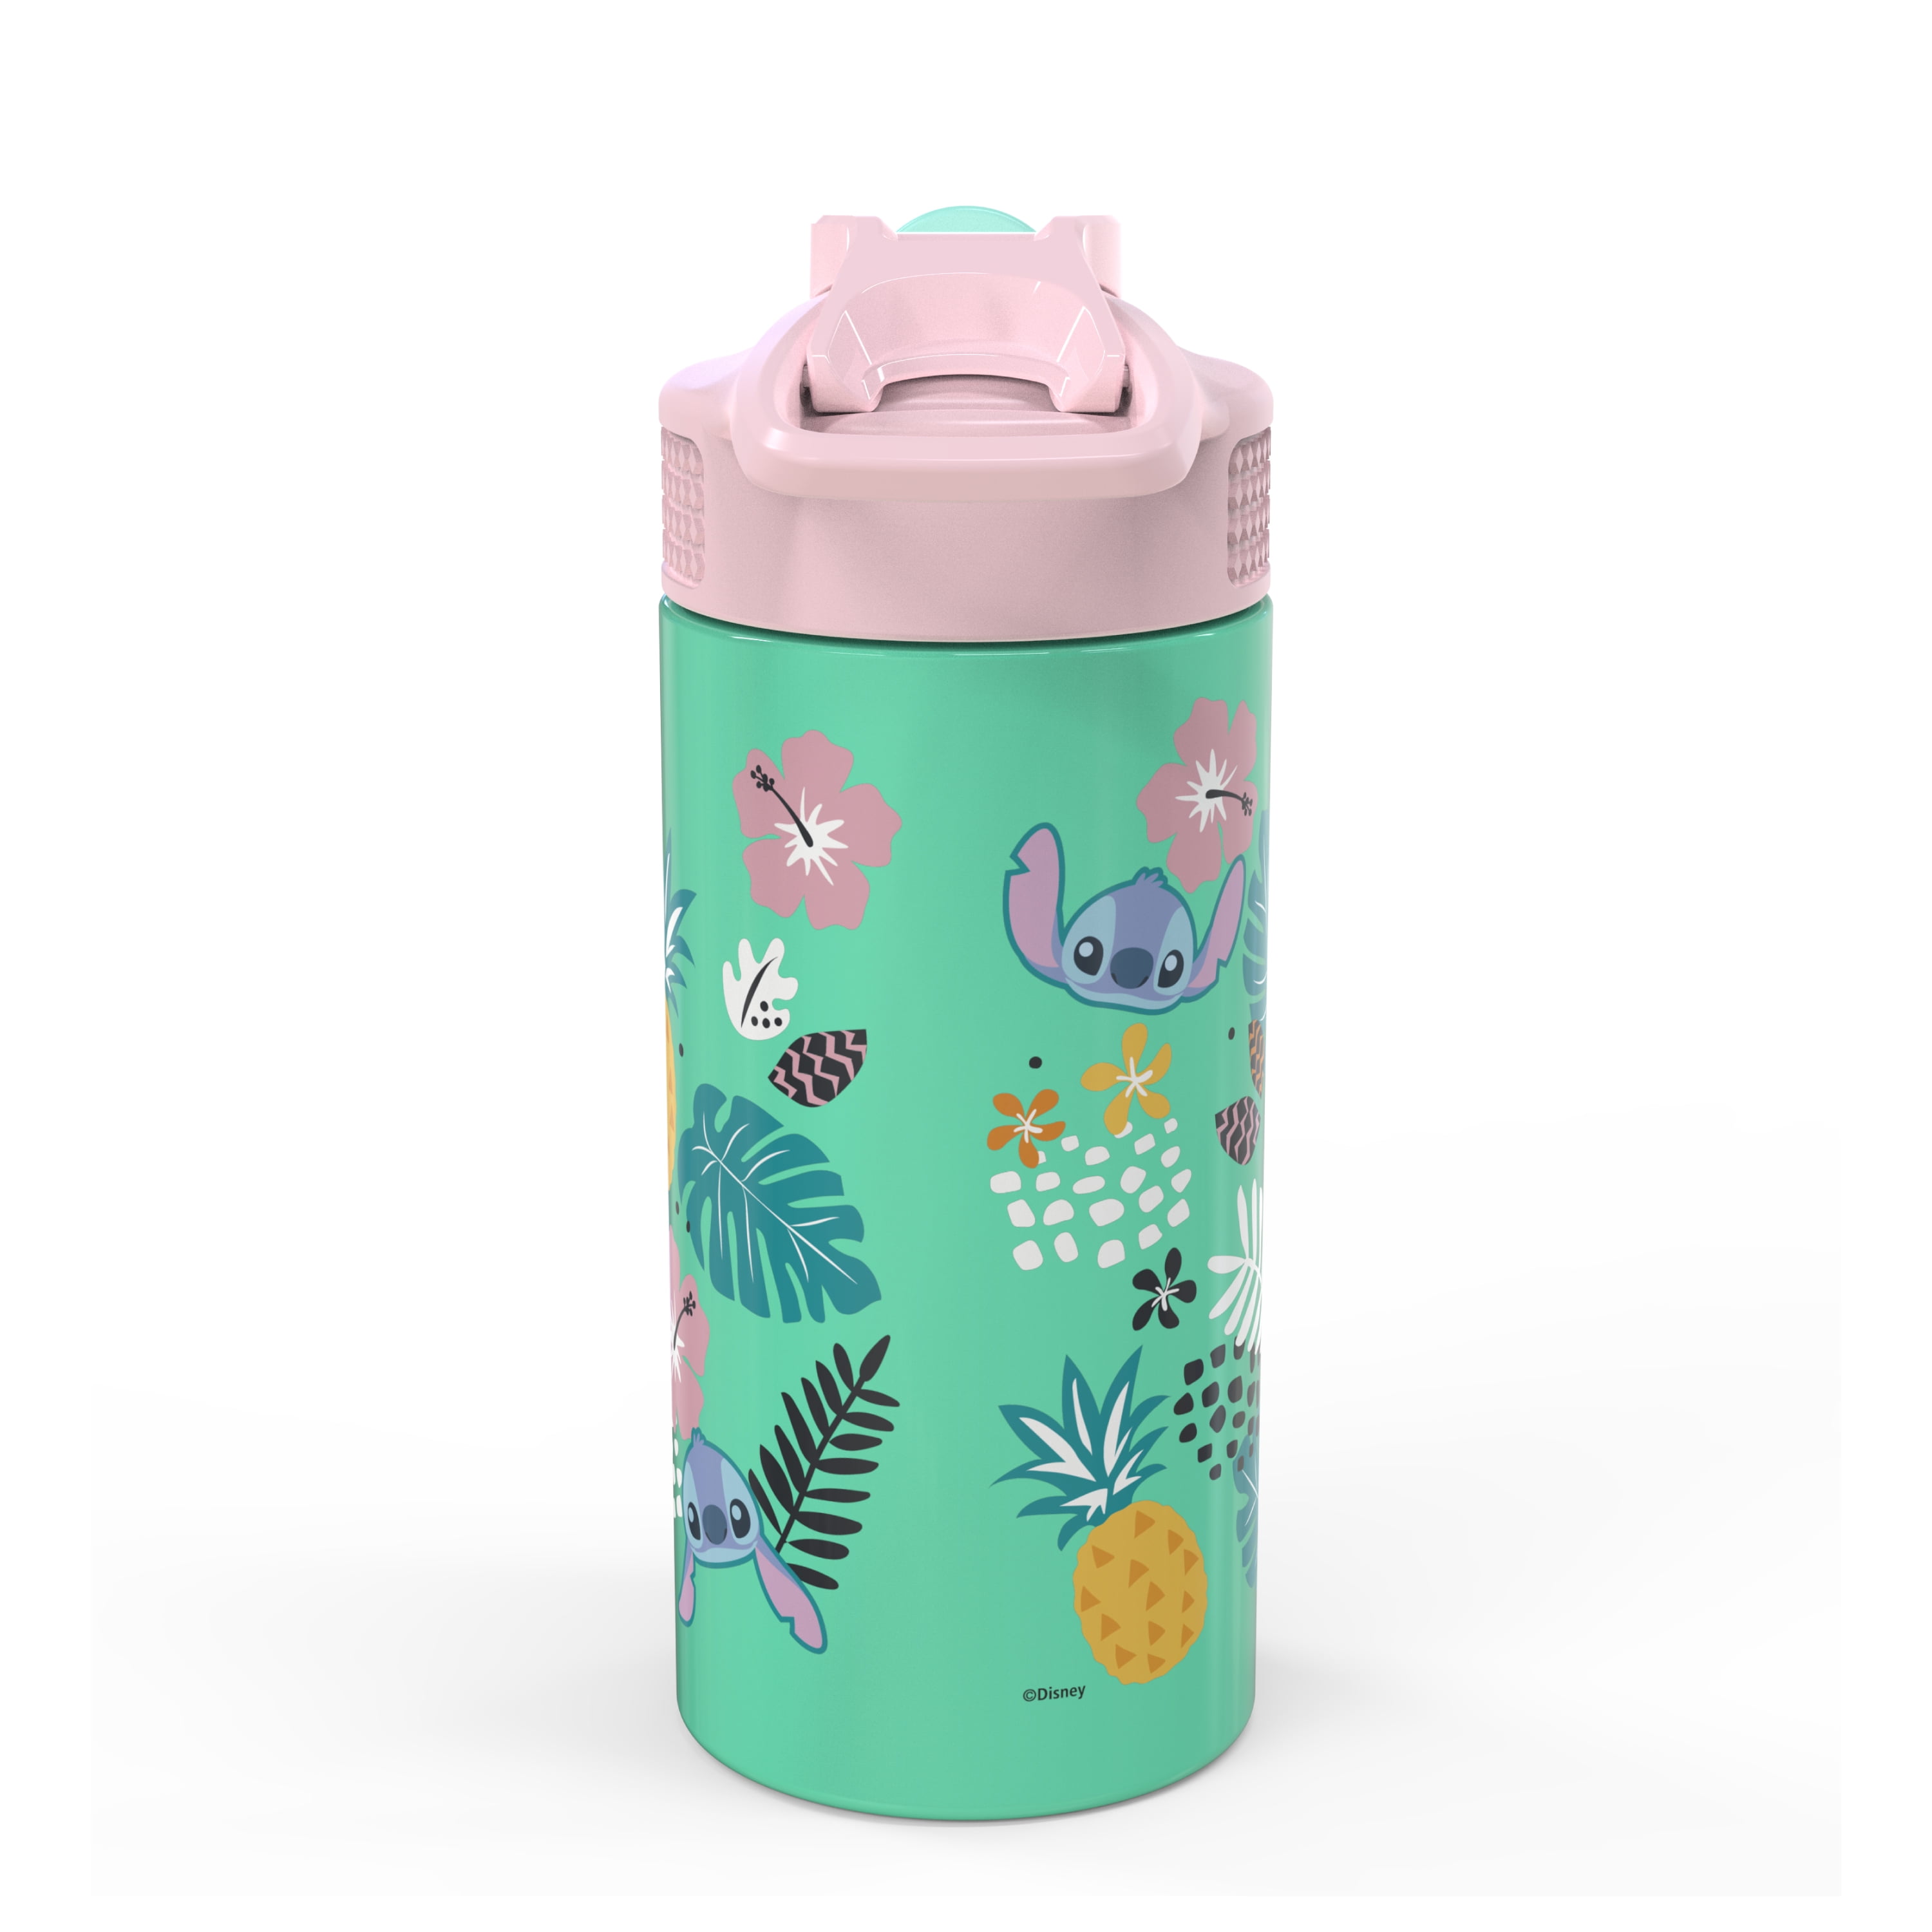 Disney Stitch Insulated Water Bottle - 515ml Stainless Steel Metal Drinks  Bottle Teenagers Hot or Co…See more Disney Stitch Insulated Water Bottle 